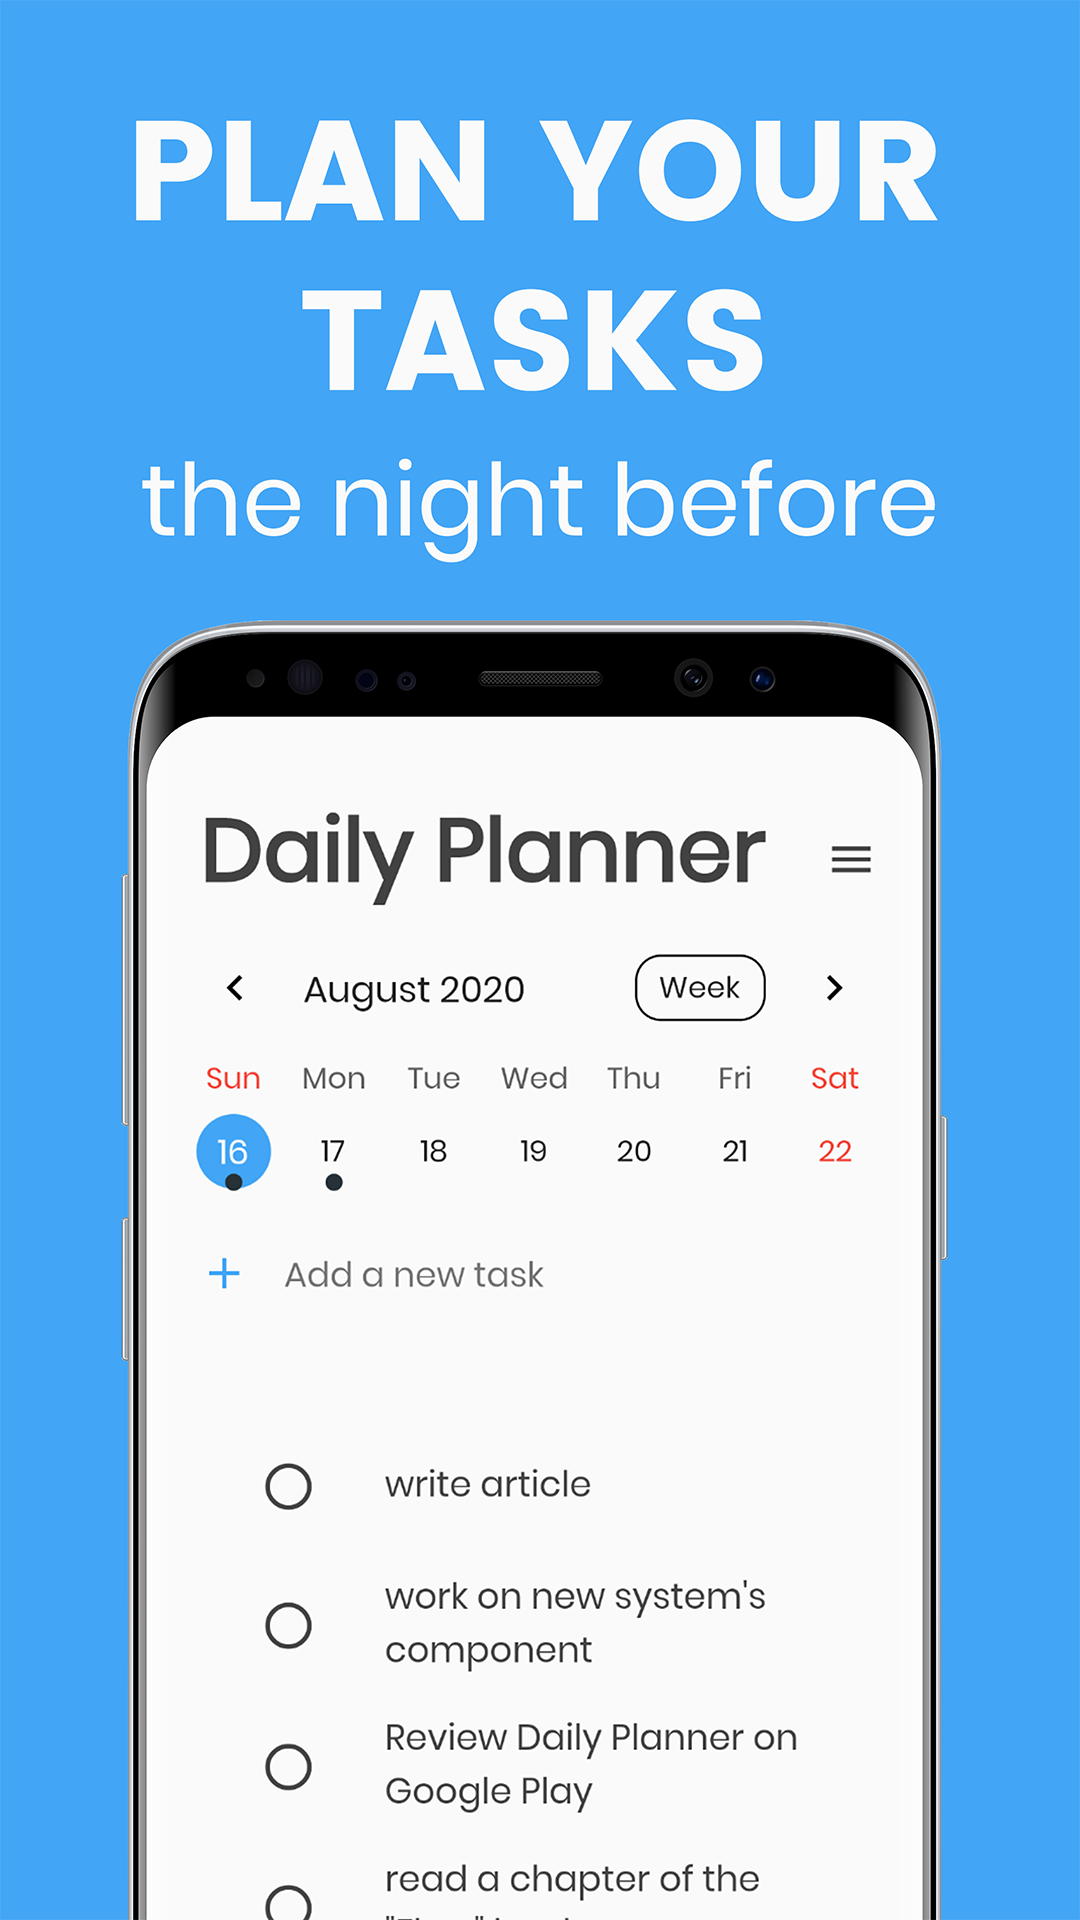 Daily Planner It's All Widgets!